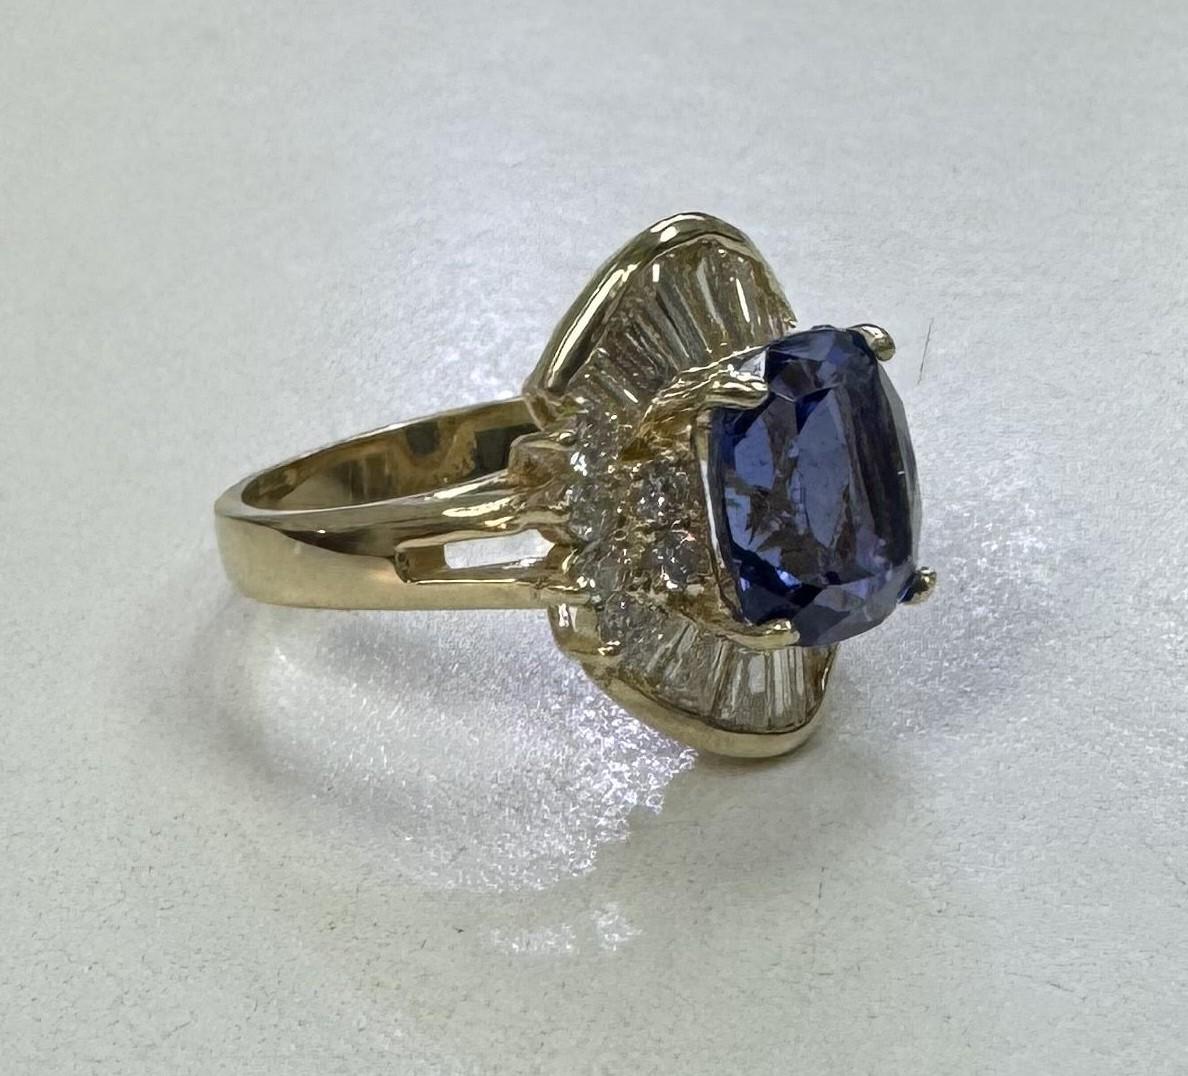 Specifications:
*Motivated to Sell - Please make a Fair Offer*
    main stone: GIA Certified Tanzanite Cushion-cut 
                       3.68ct.  A-Quality 
    diamond: 14Tapper Baguette cut diamonds and 
                     rounds total weight